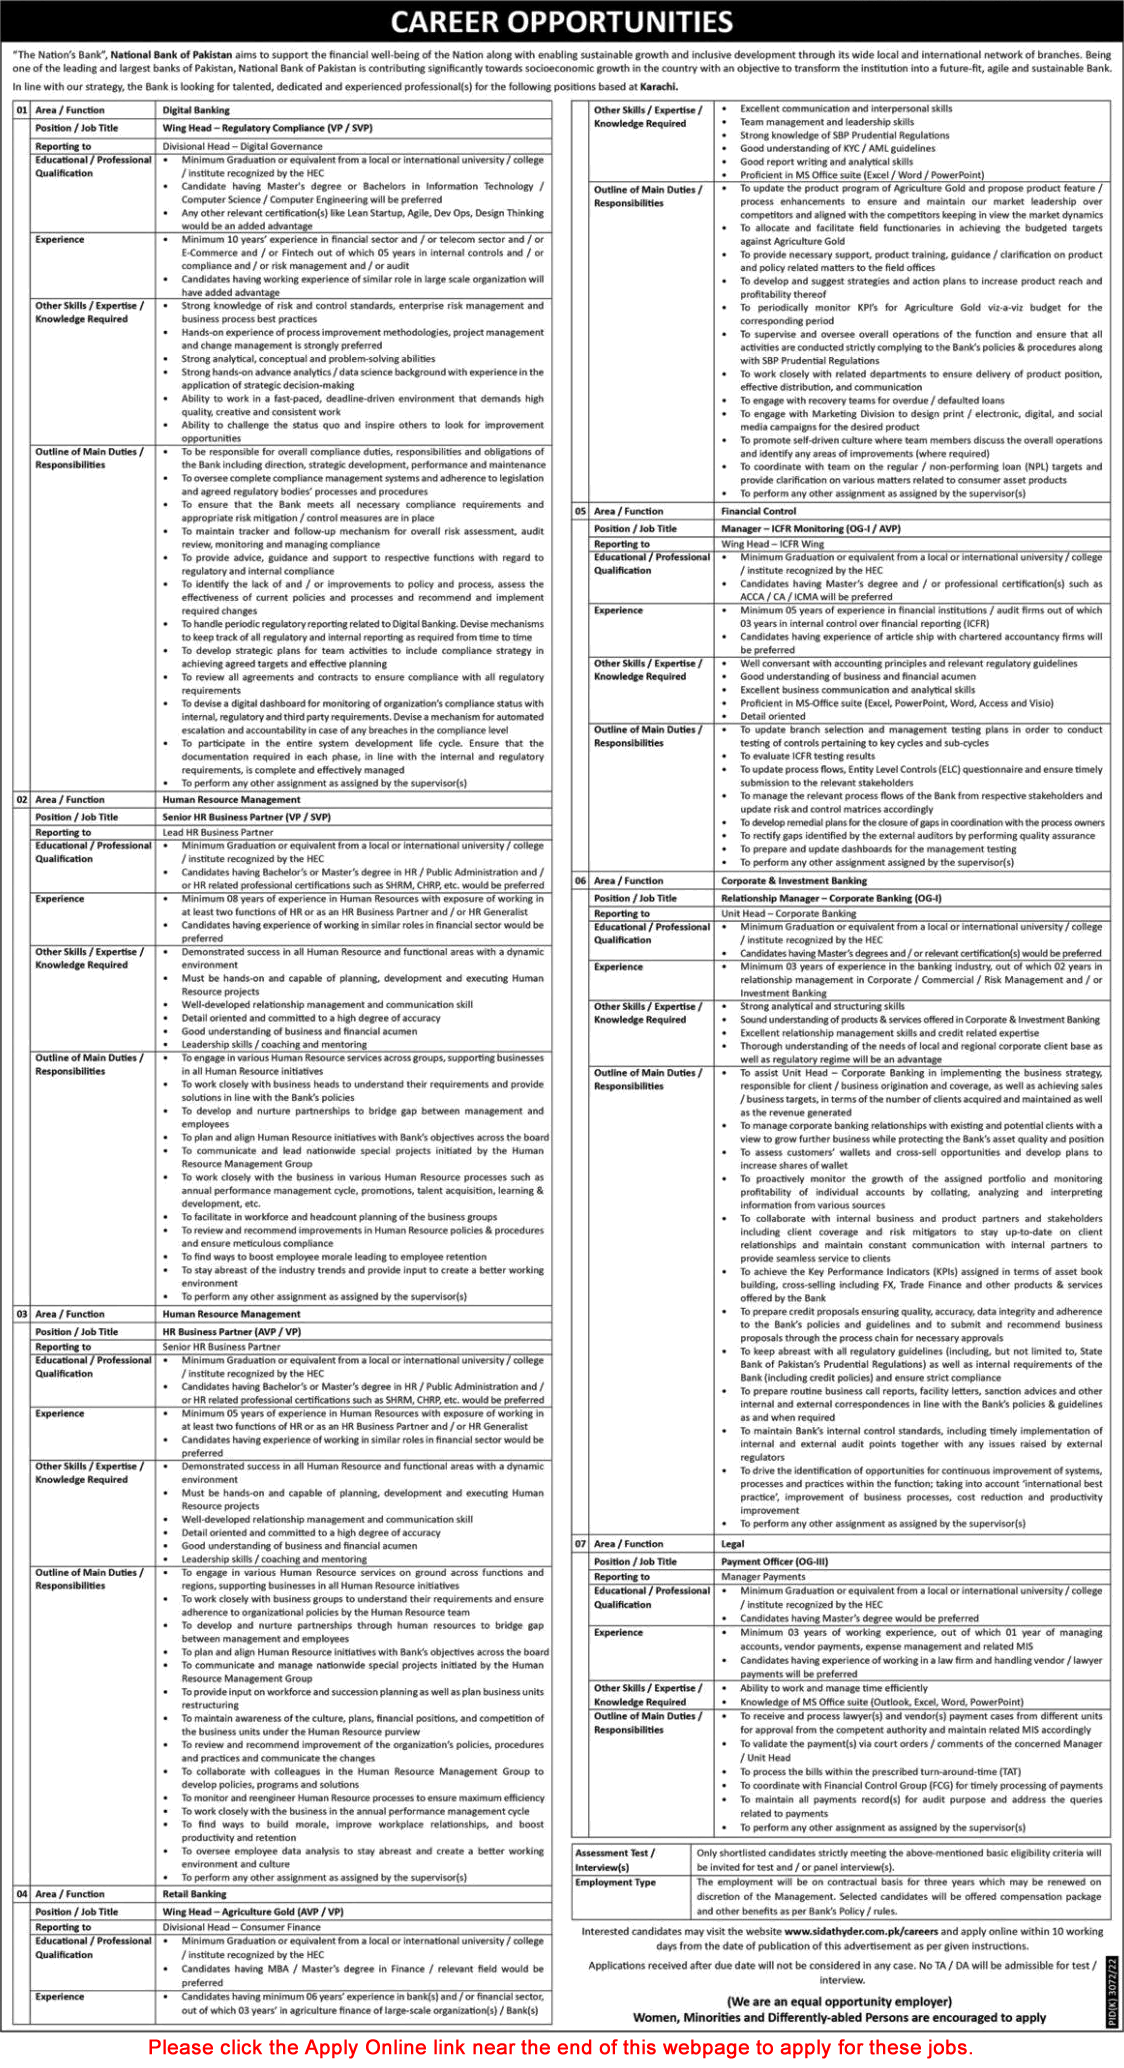 National Bank of Pakistan Jobs 2023 April / May Apply Online Relationship Manager & Others Latest